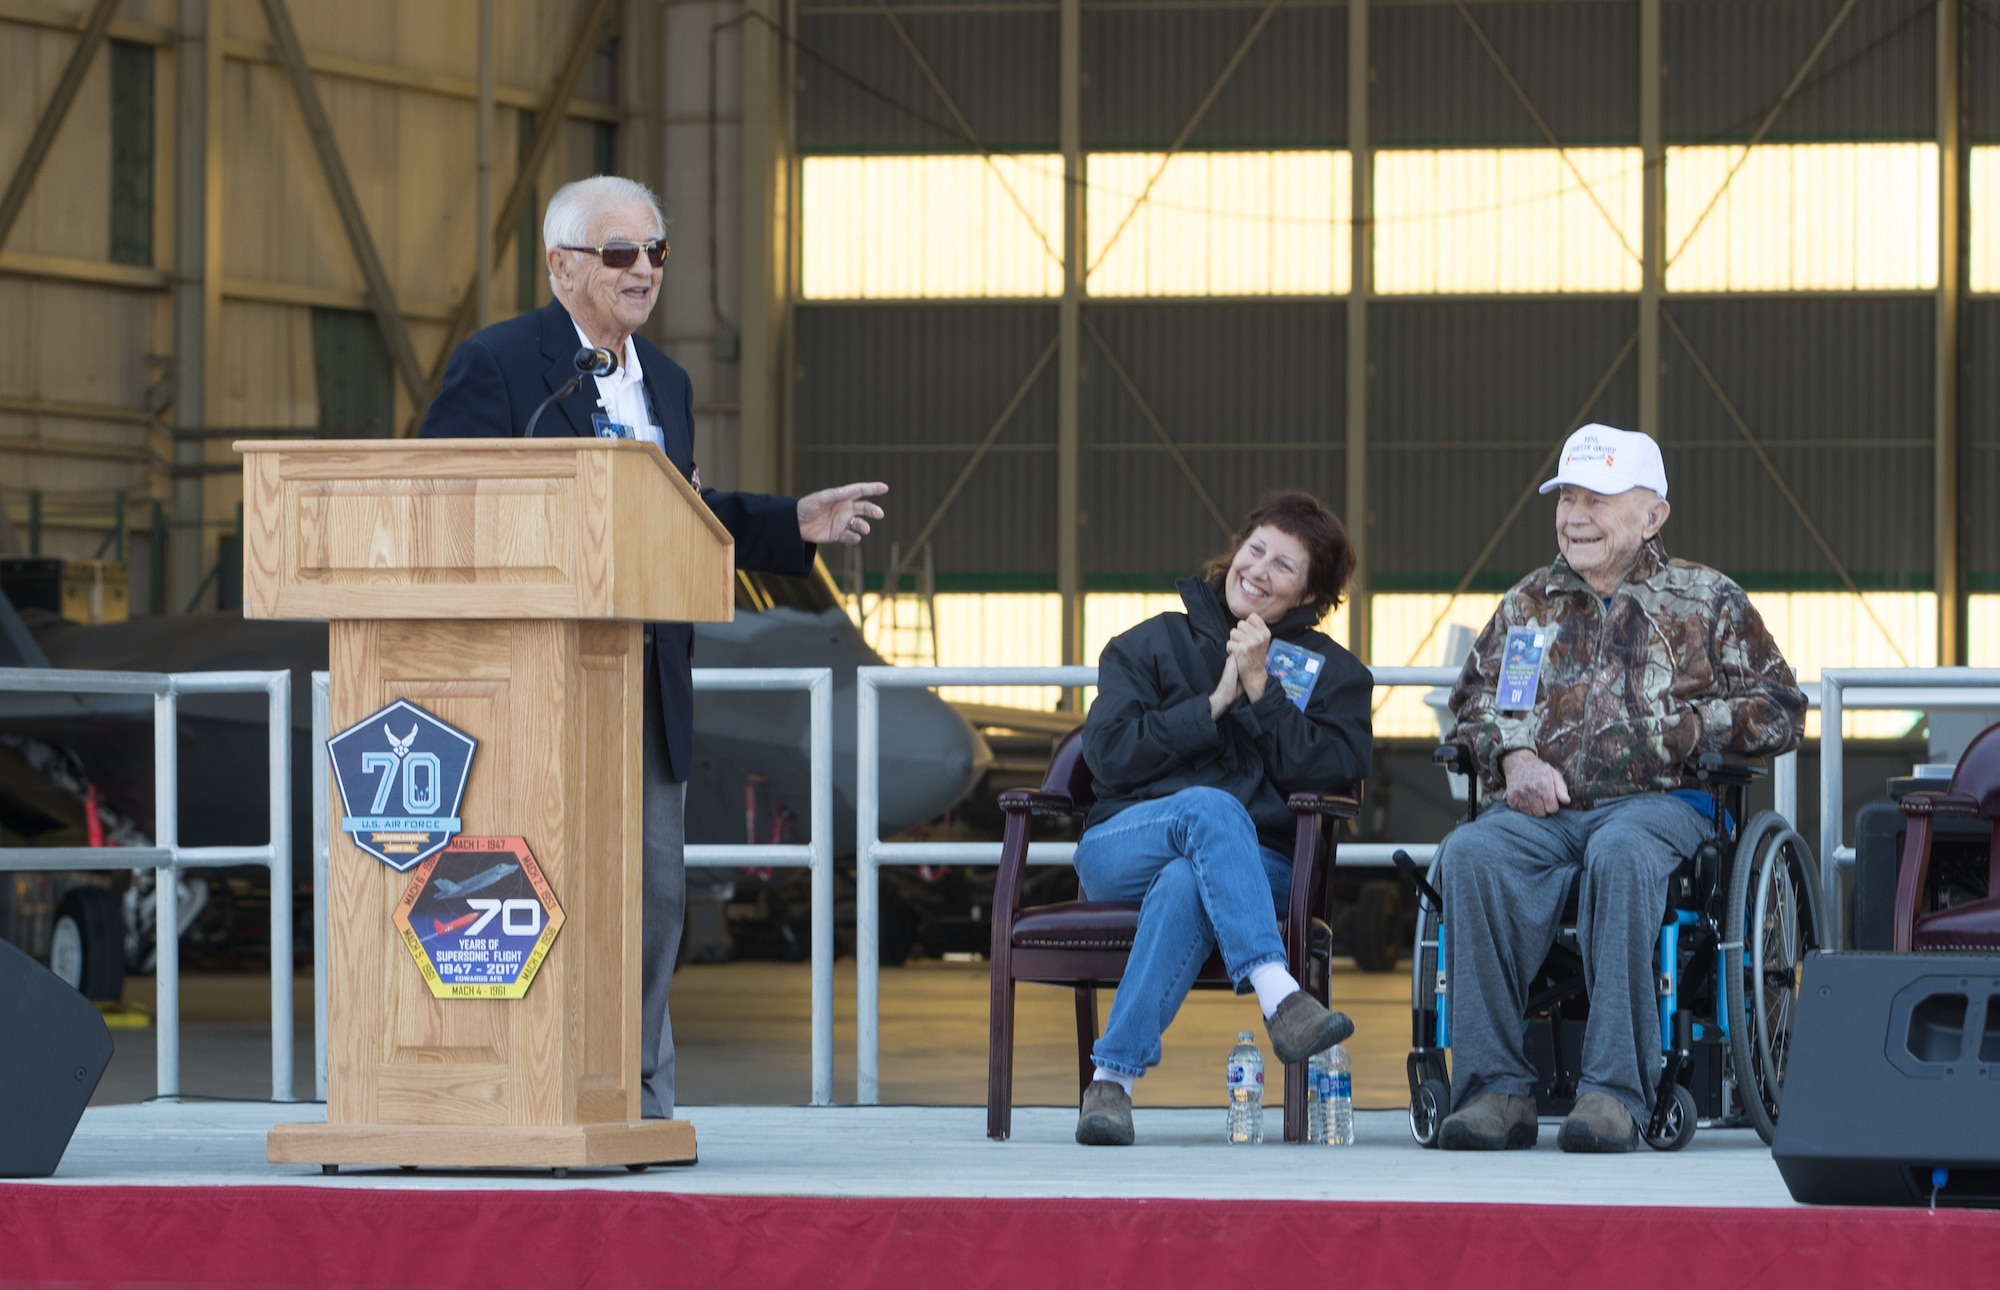 Retired Brig. Gen. Robert Cardenas speaks at the opening ceremony of the 70th Anniversary of Supersonic Flight held Oct. 13 on Ramp 6. Behind him is retired Brig. Gen. Chuck Yeager and wife Victoria. Cardenas piloted the B-29 launch aircraft that released the X-1 experimental rocket plane in which Yeager, a captain at the time, became the first man to fly faster than the speed of sound.